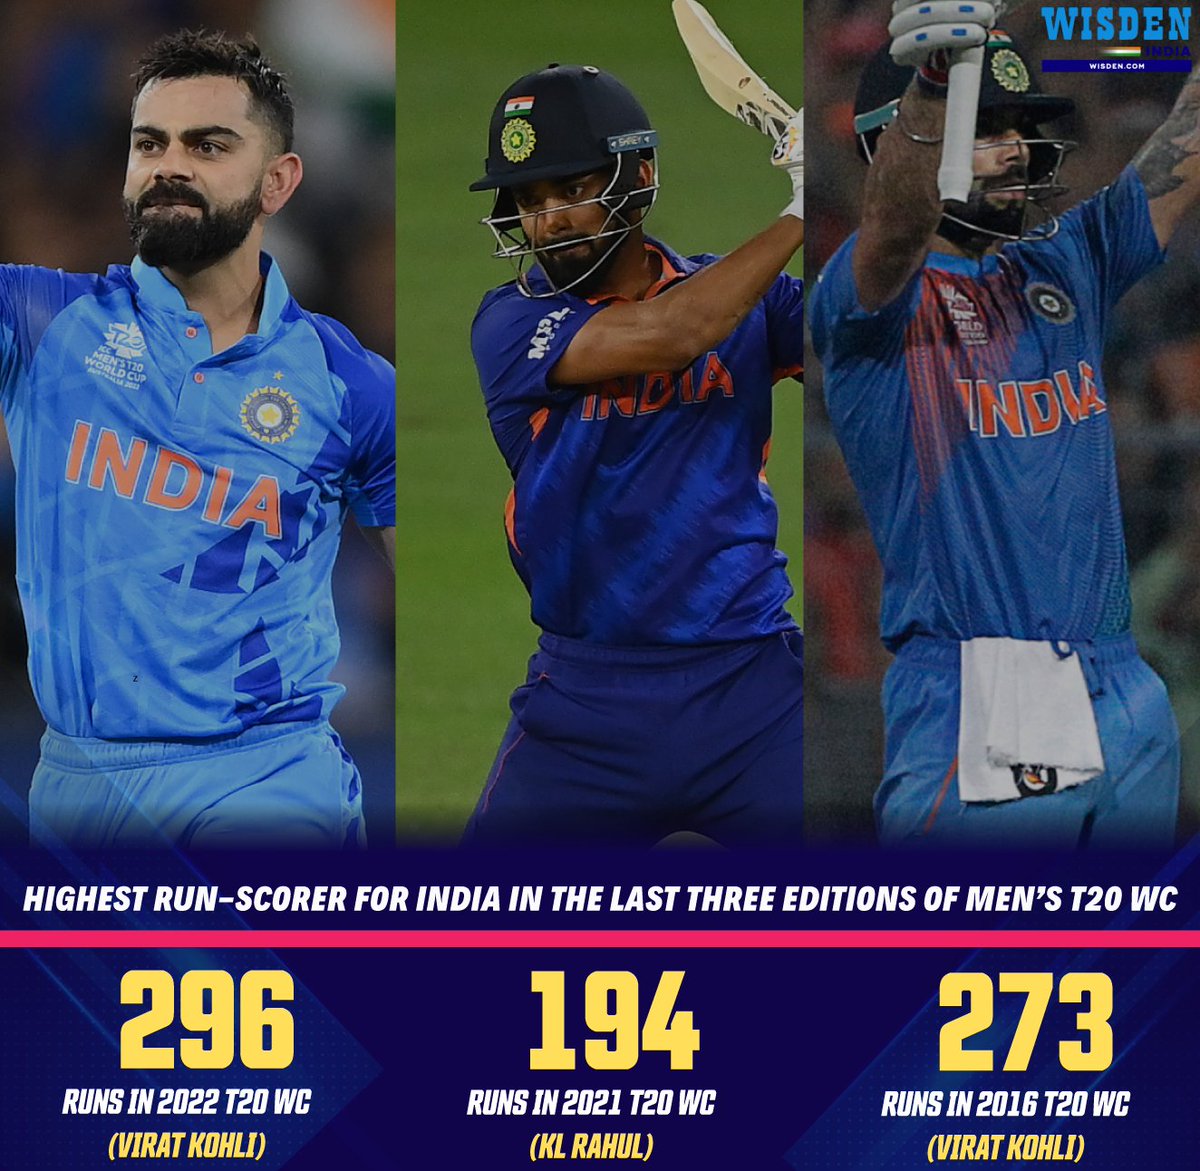 2016 T20 World Cup - Virat Kohli✅ 2021 T20 World Cup - KL Rahul✅ 2022 T20 World Cup - Virat Kohli ✅ Virat Kohli will be eager to maintain his consistency in the upcoming T20 WC 👏 #ViratKohli #India #Cricket #T20WorldCup #KLRahul